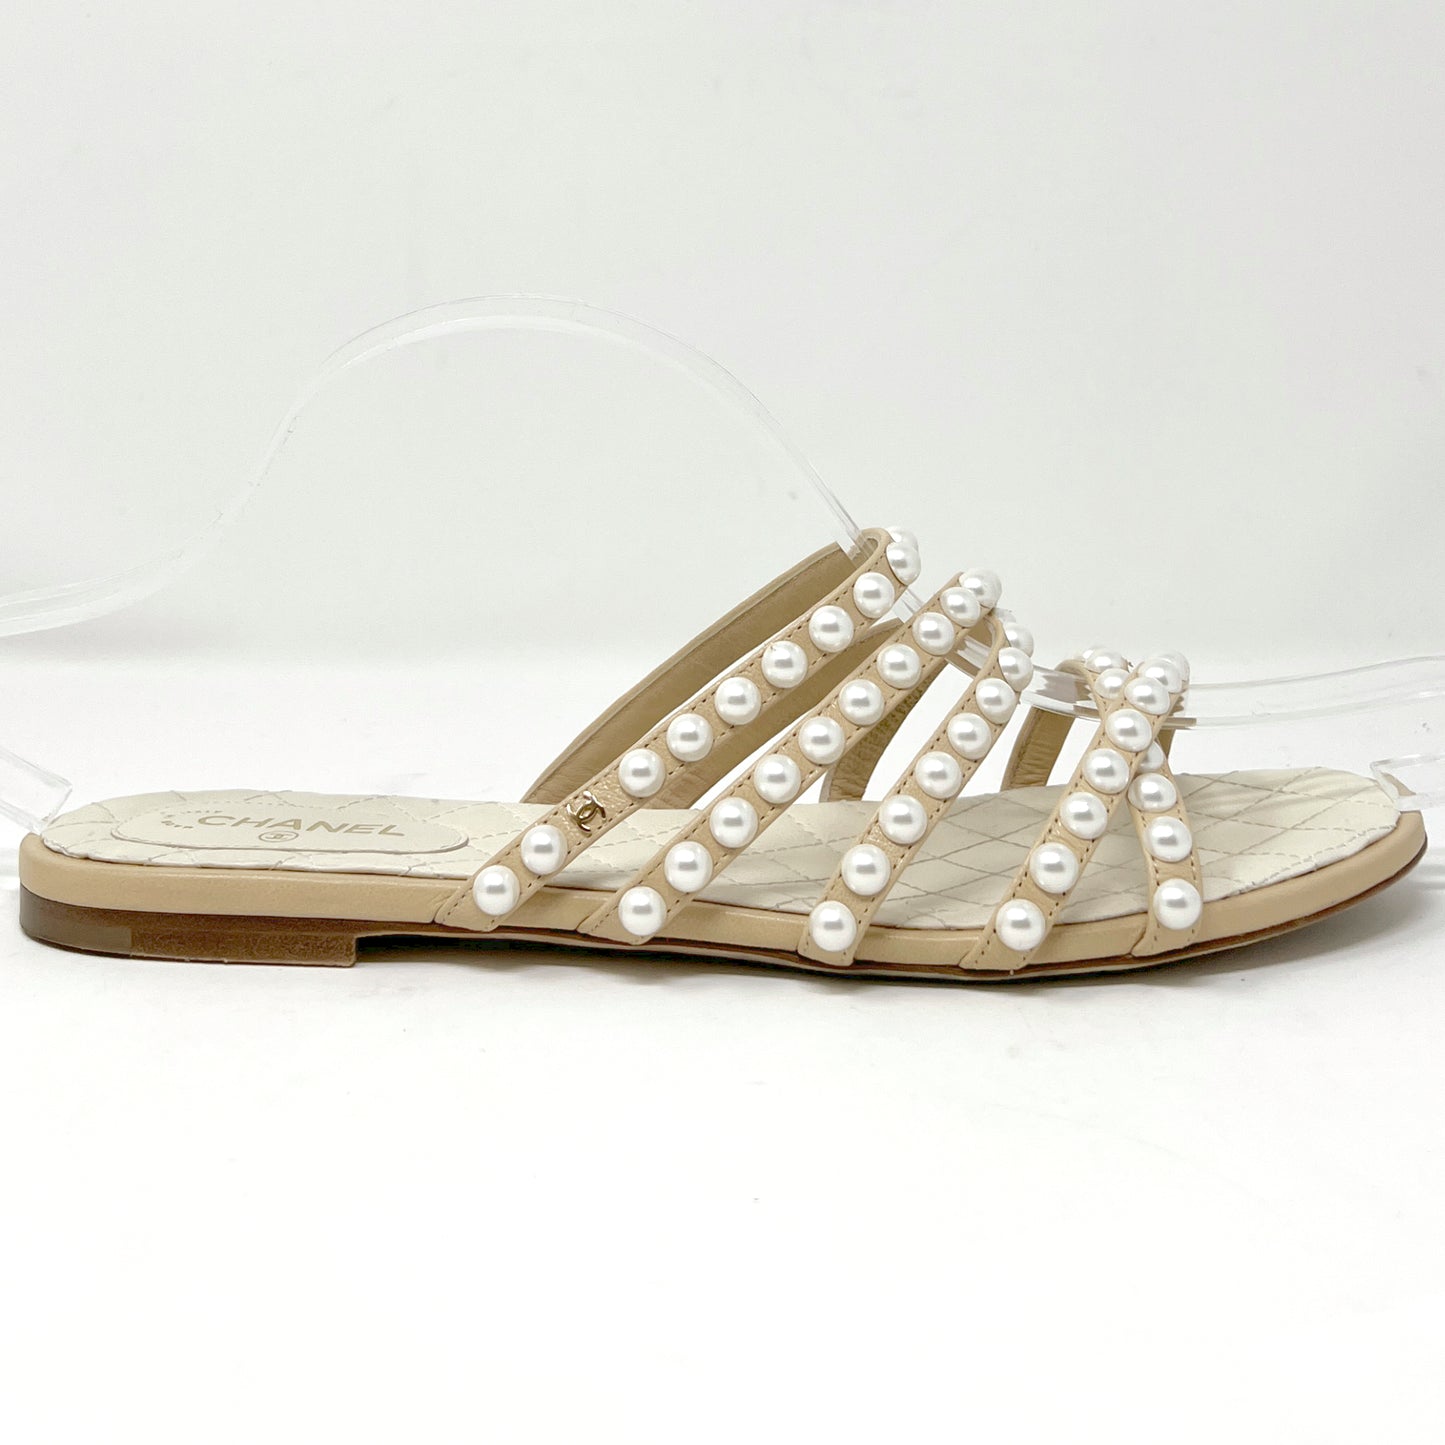 Chanel Tan Leather Multistrap Pearl Embellished Logo Slip On Flats Sandals Mules